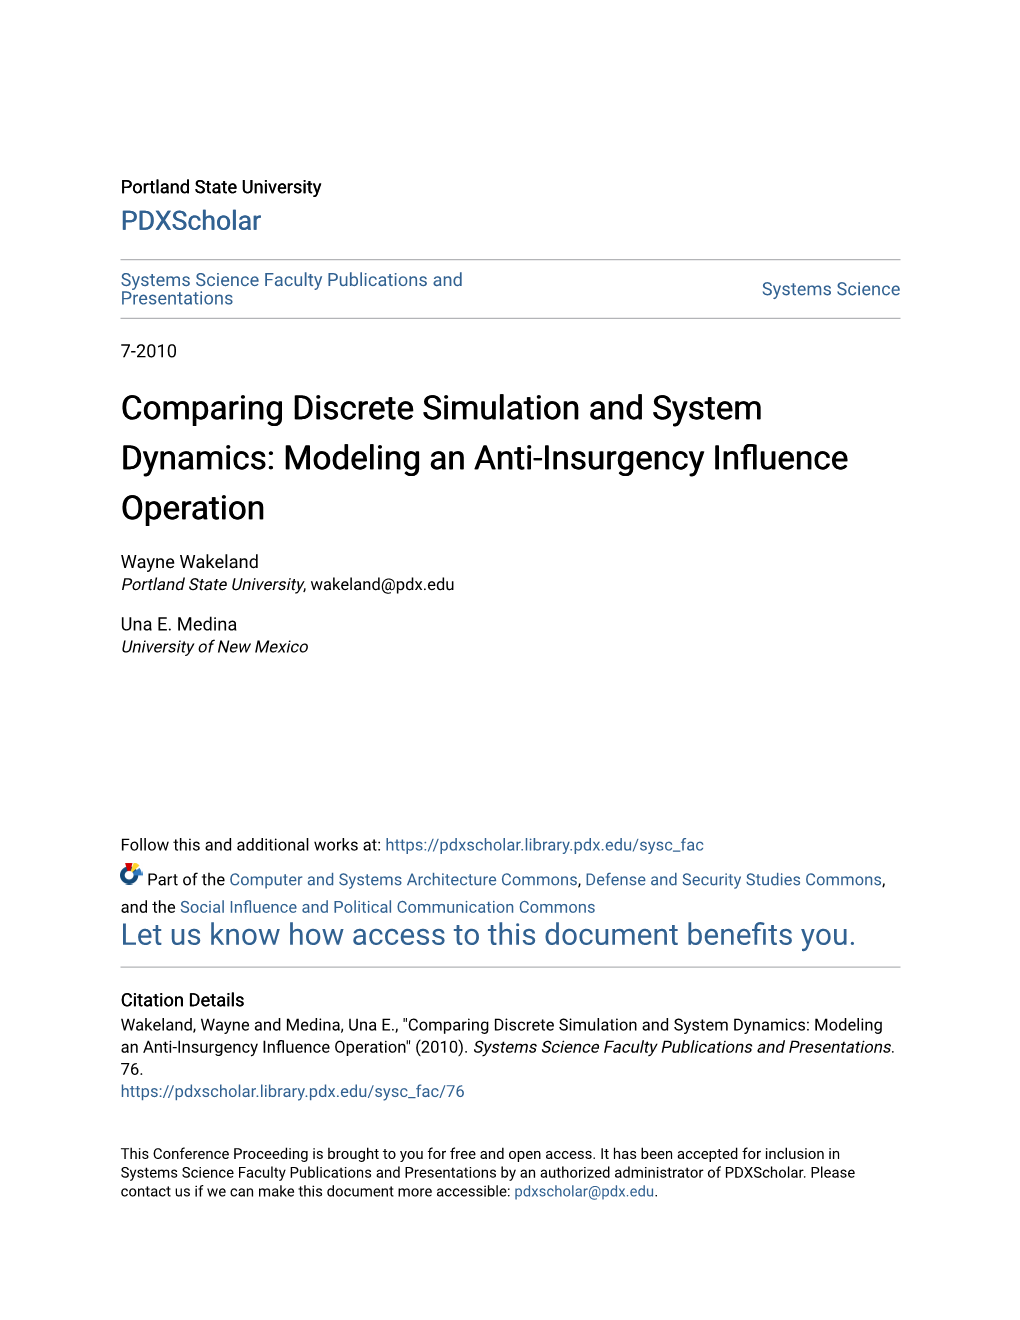 Comparing Discrete Simulation and System Dynamics: Modeling an Anti-Insurgency Influence Operation